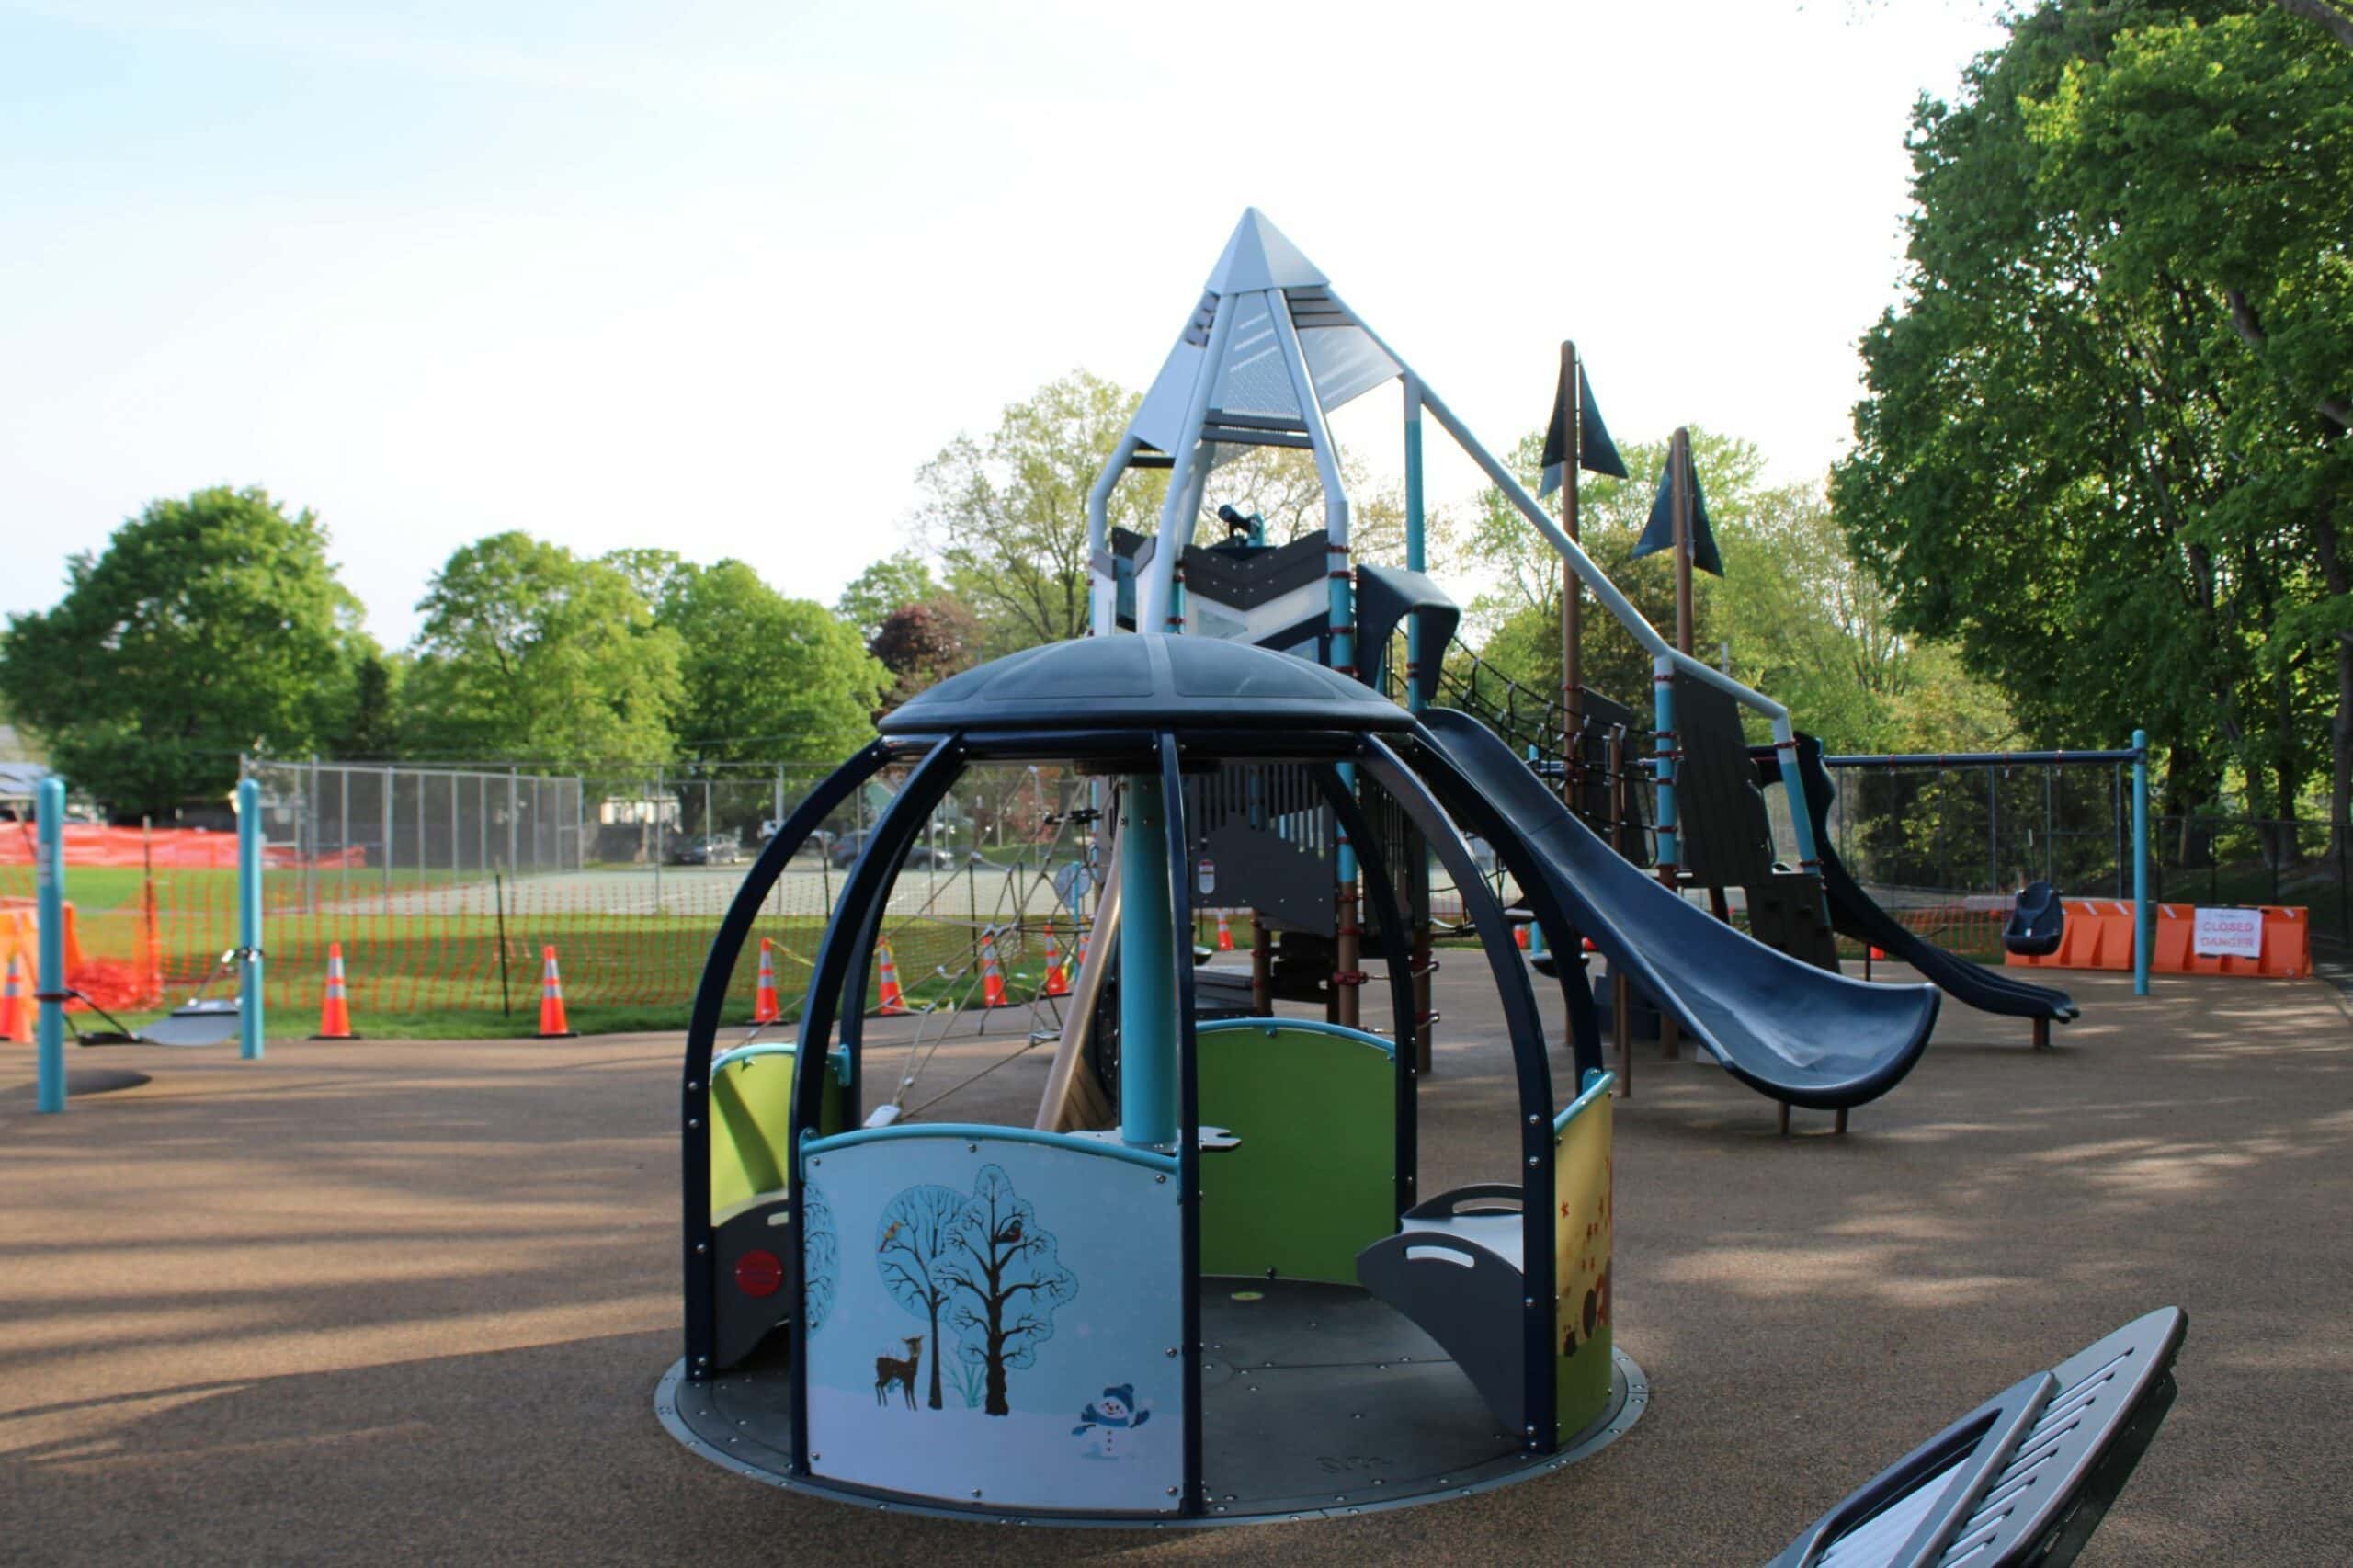 Playground at Armstrong school in Westborough almost finished